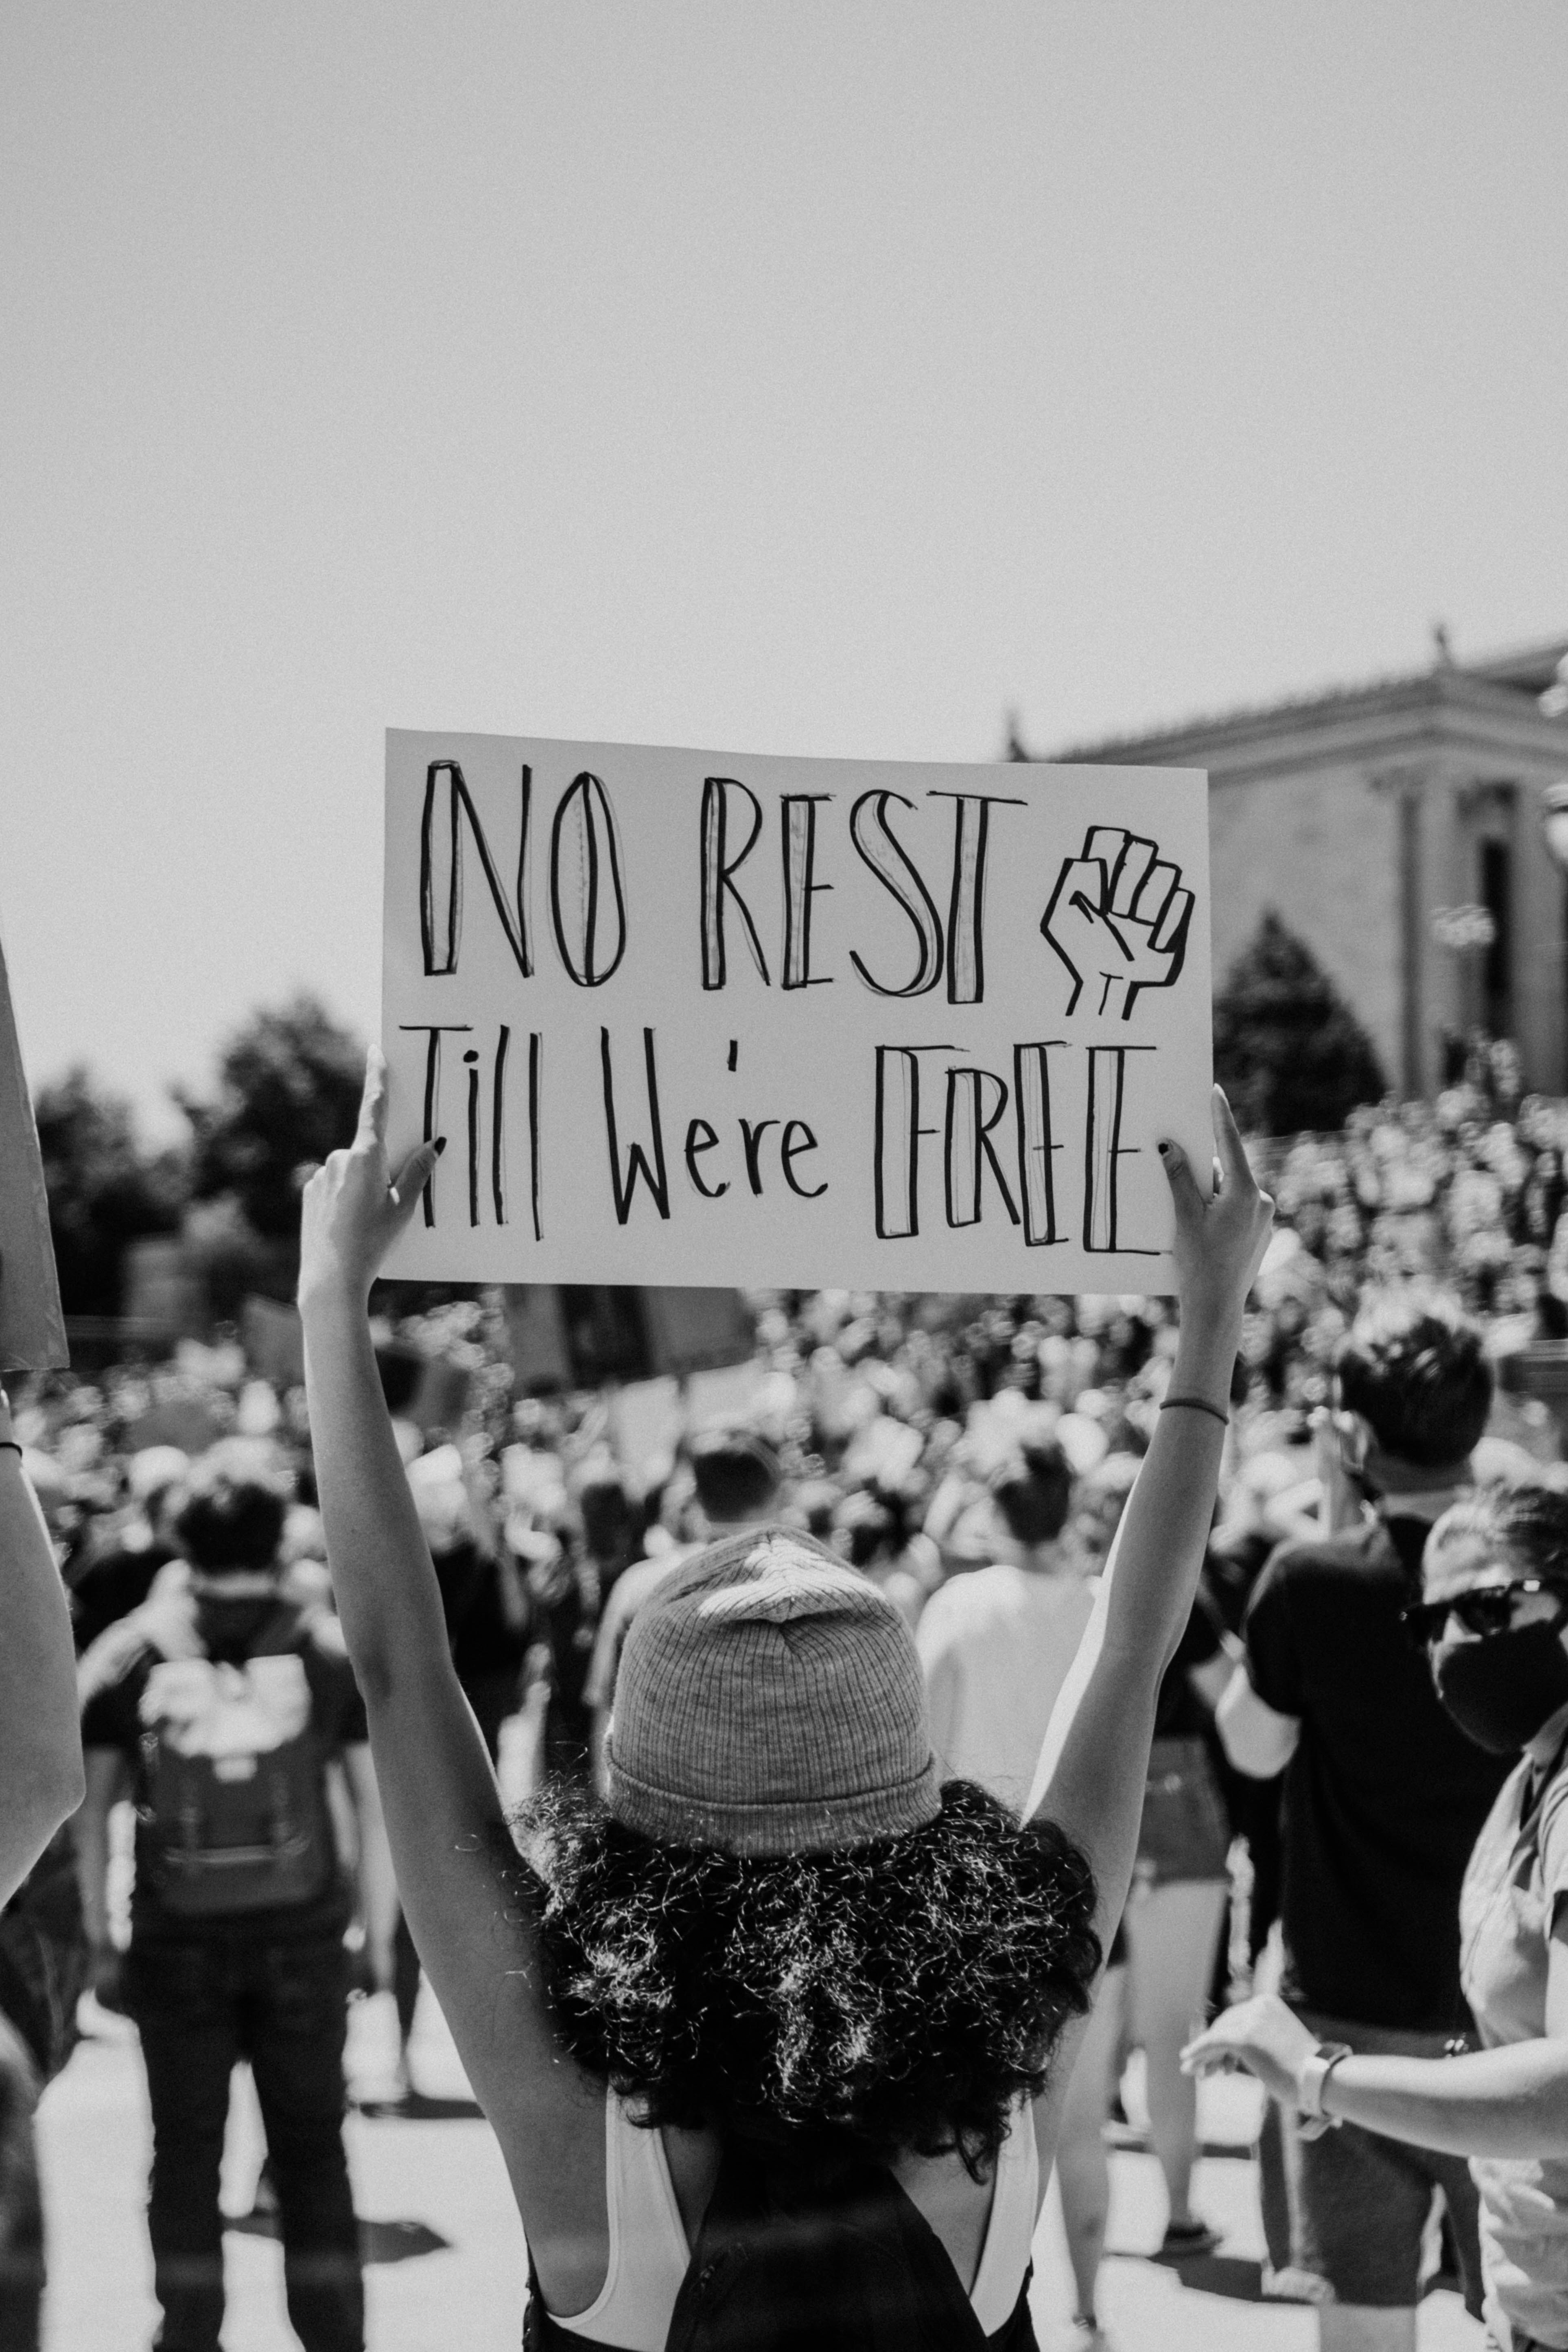 "No Rest Till We're Free" by Alan Daher, May 31, 2020, Philadelphia